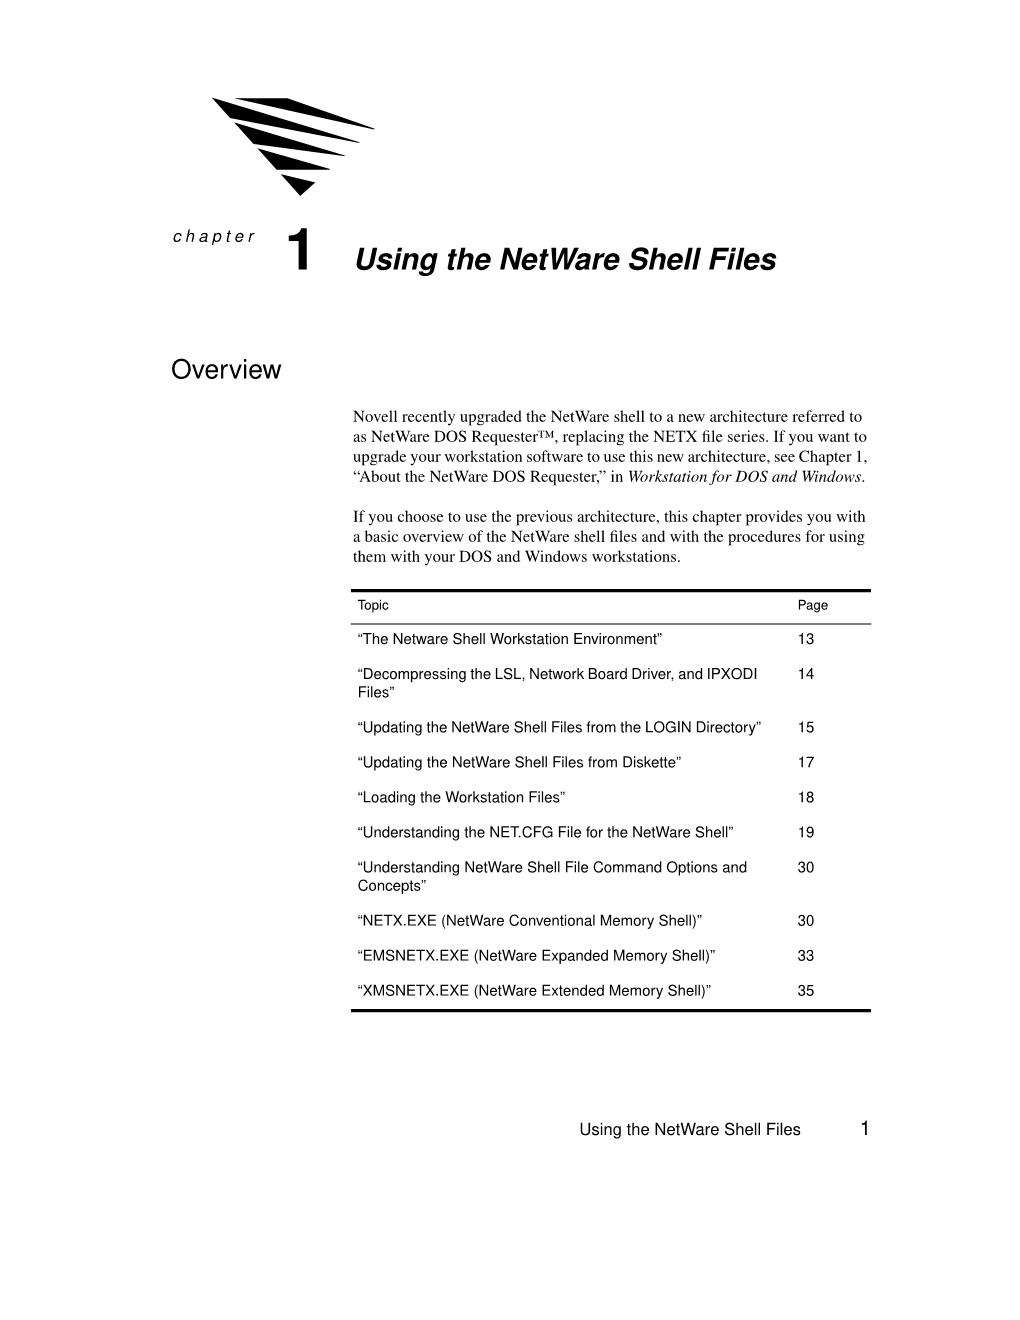 Using the Netware Shell Files